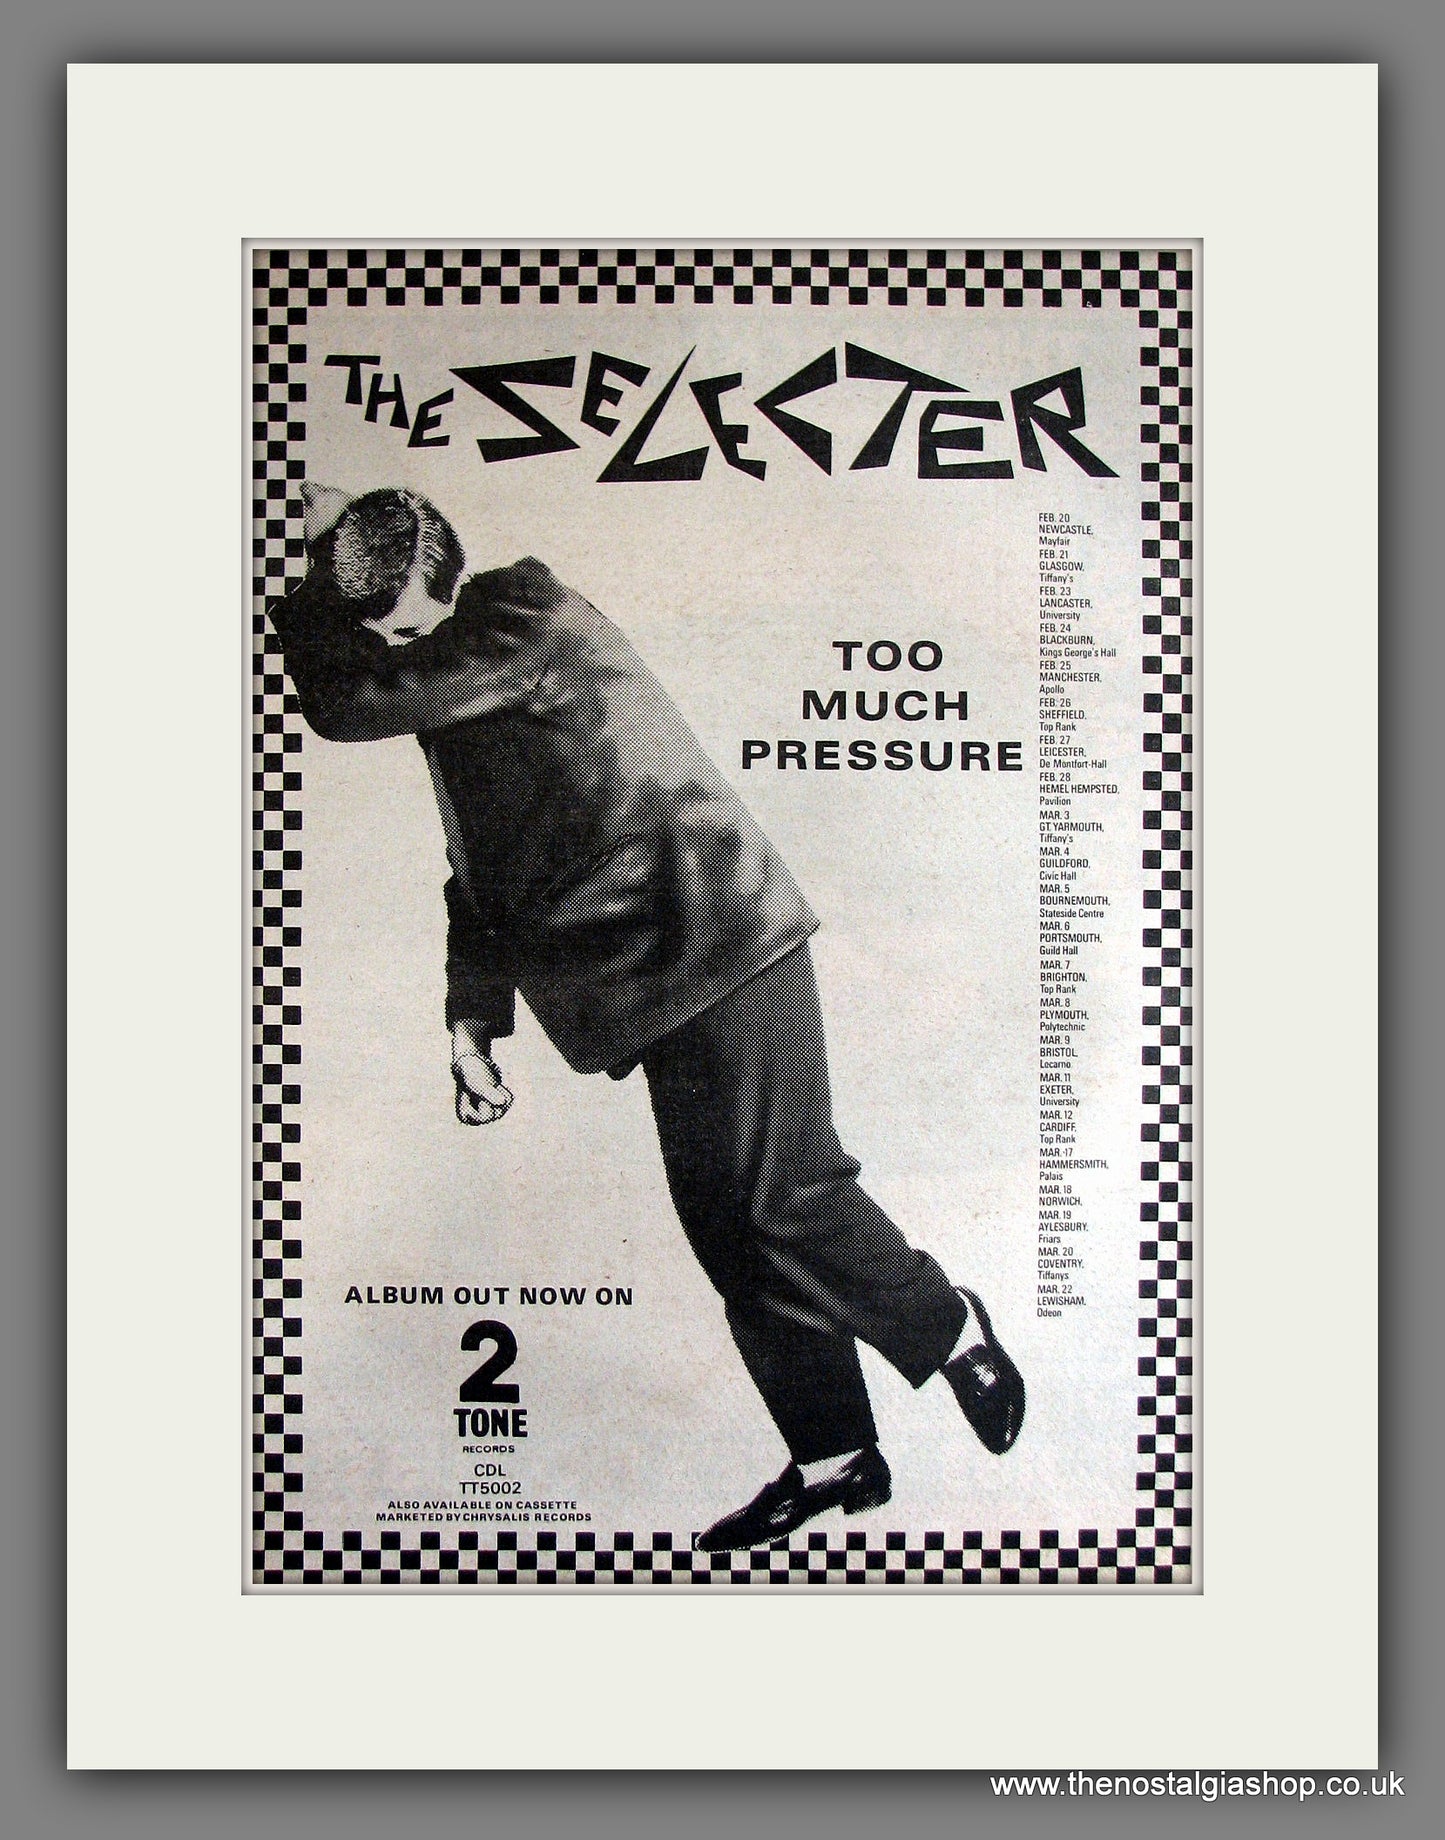 Selecter (The) Too Much Pressure. Vintage Advert 1980 (ref AD14134)